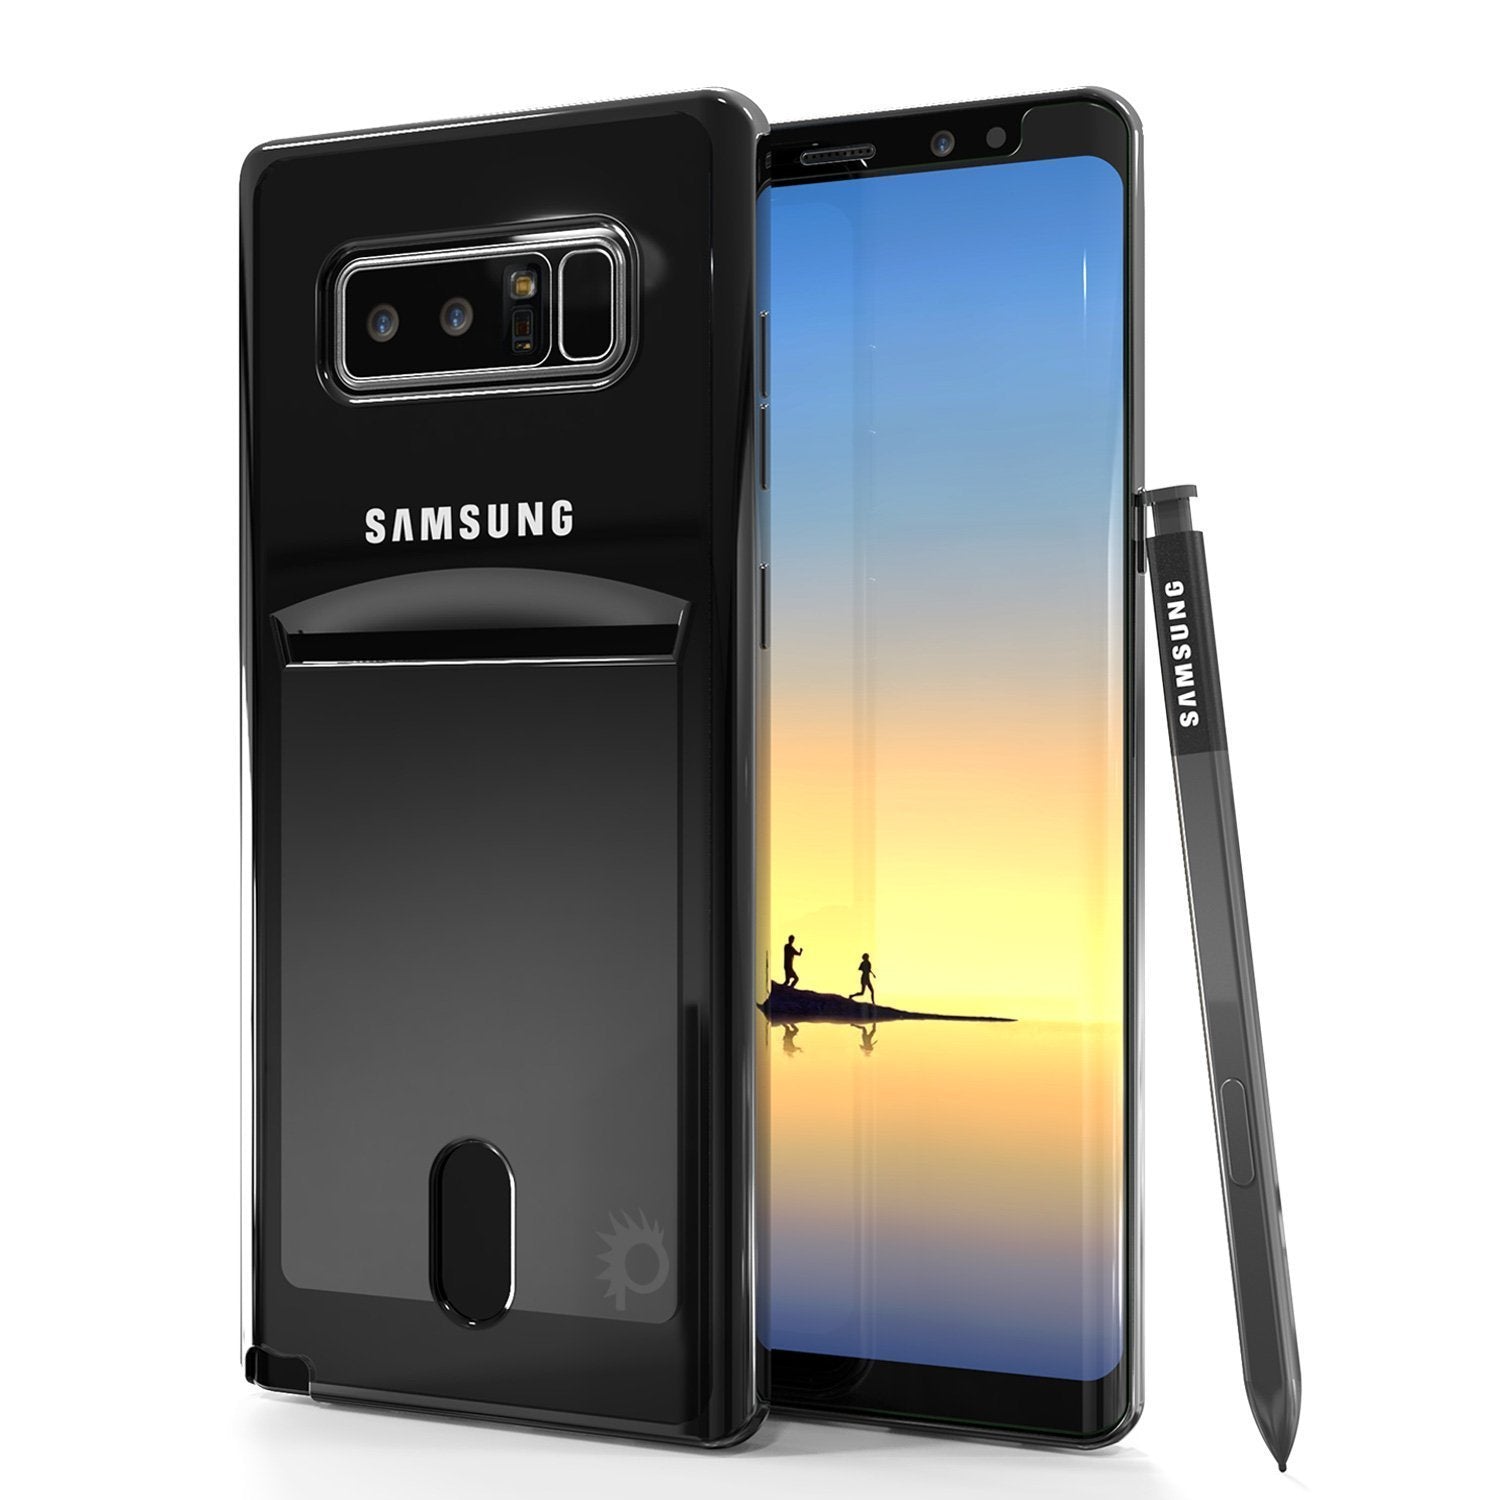 Galaxy Note 8 Case, PUNKCASE® LUCID Black Series | Card Slot | SHIELD Screen Protector | Ultra fit